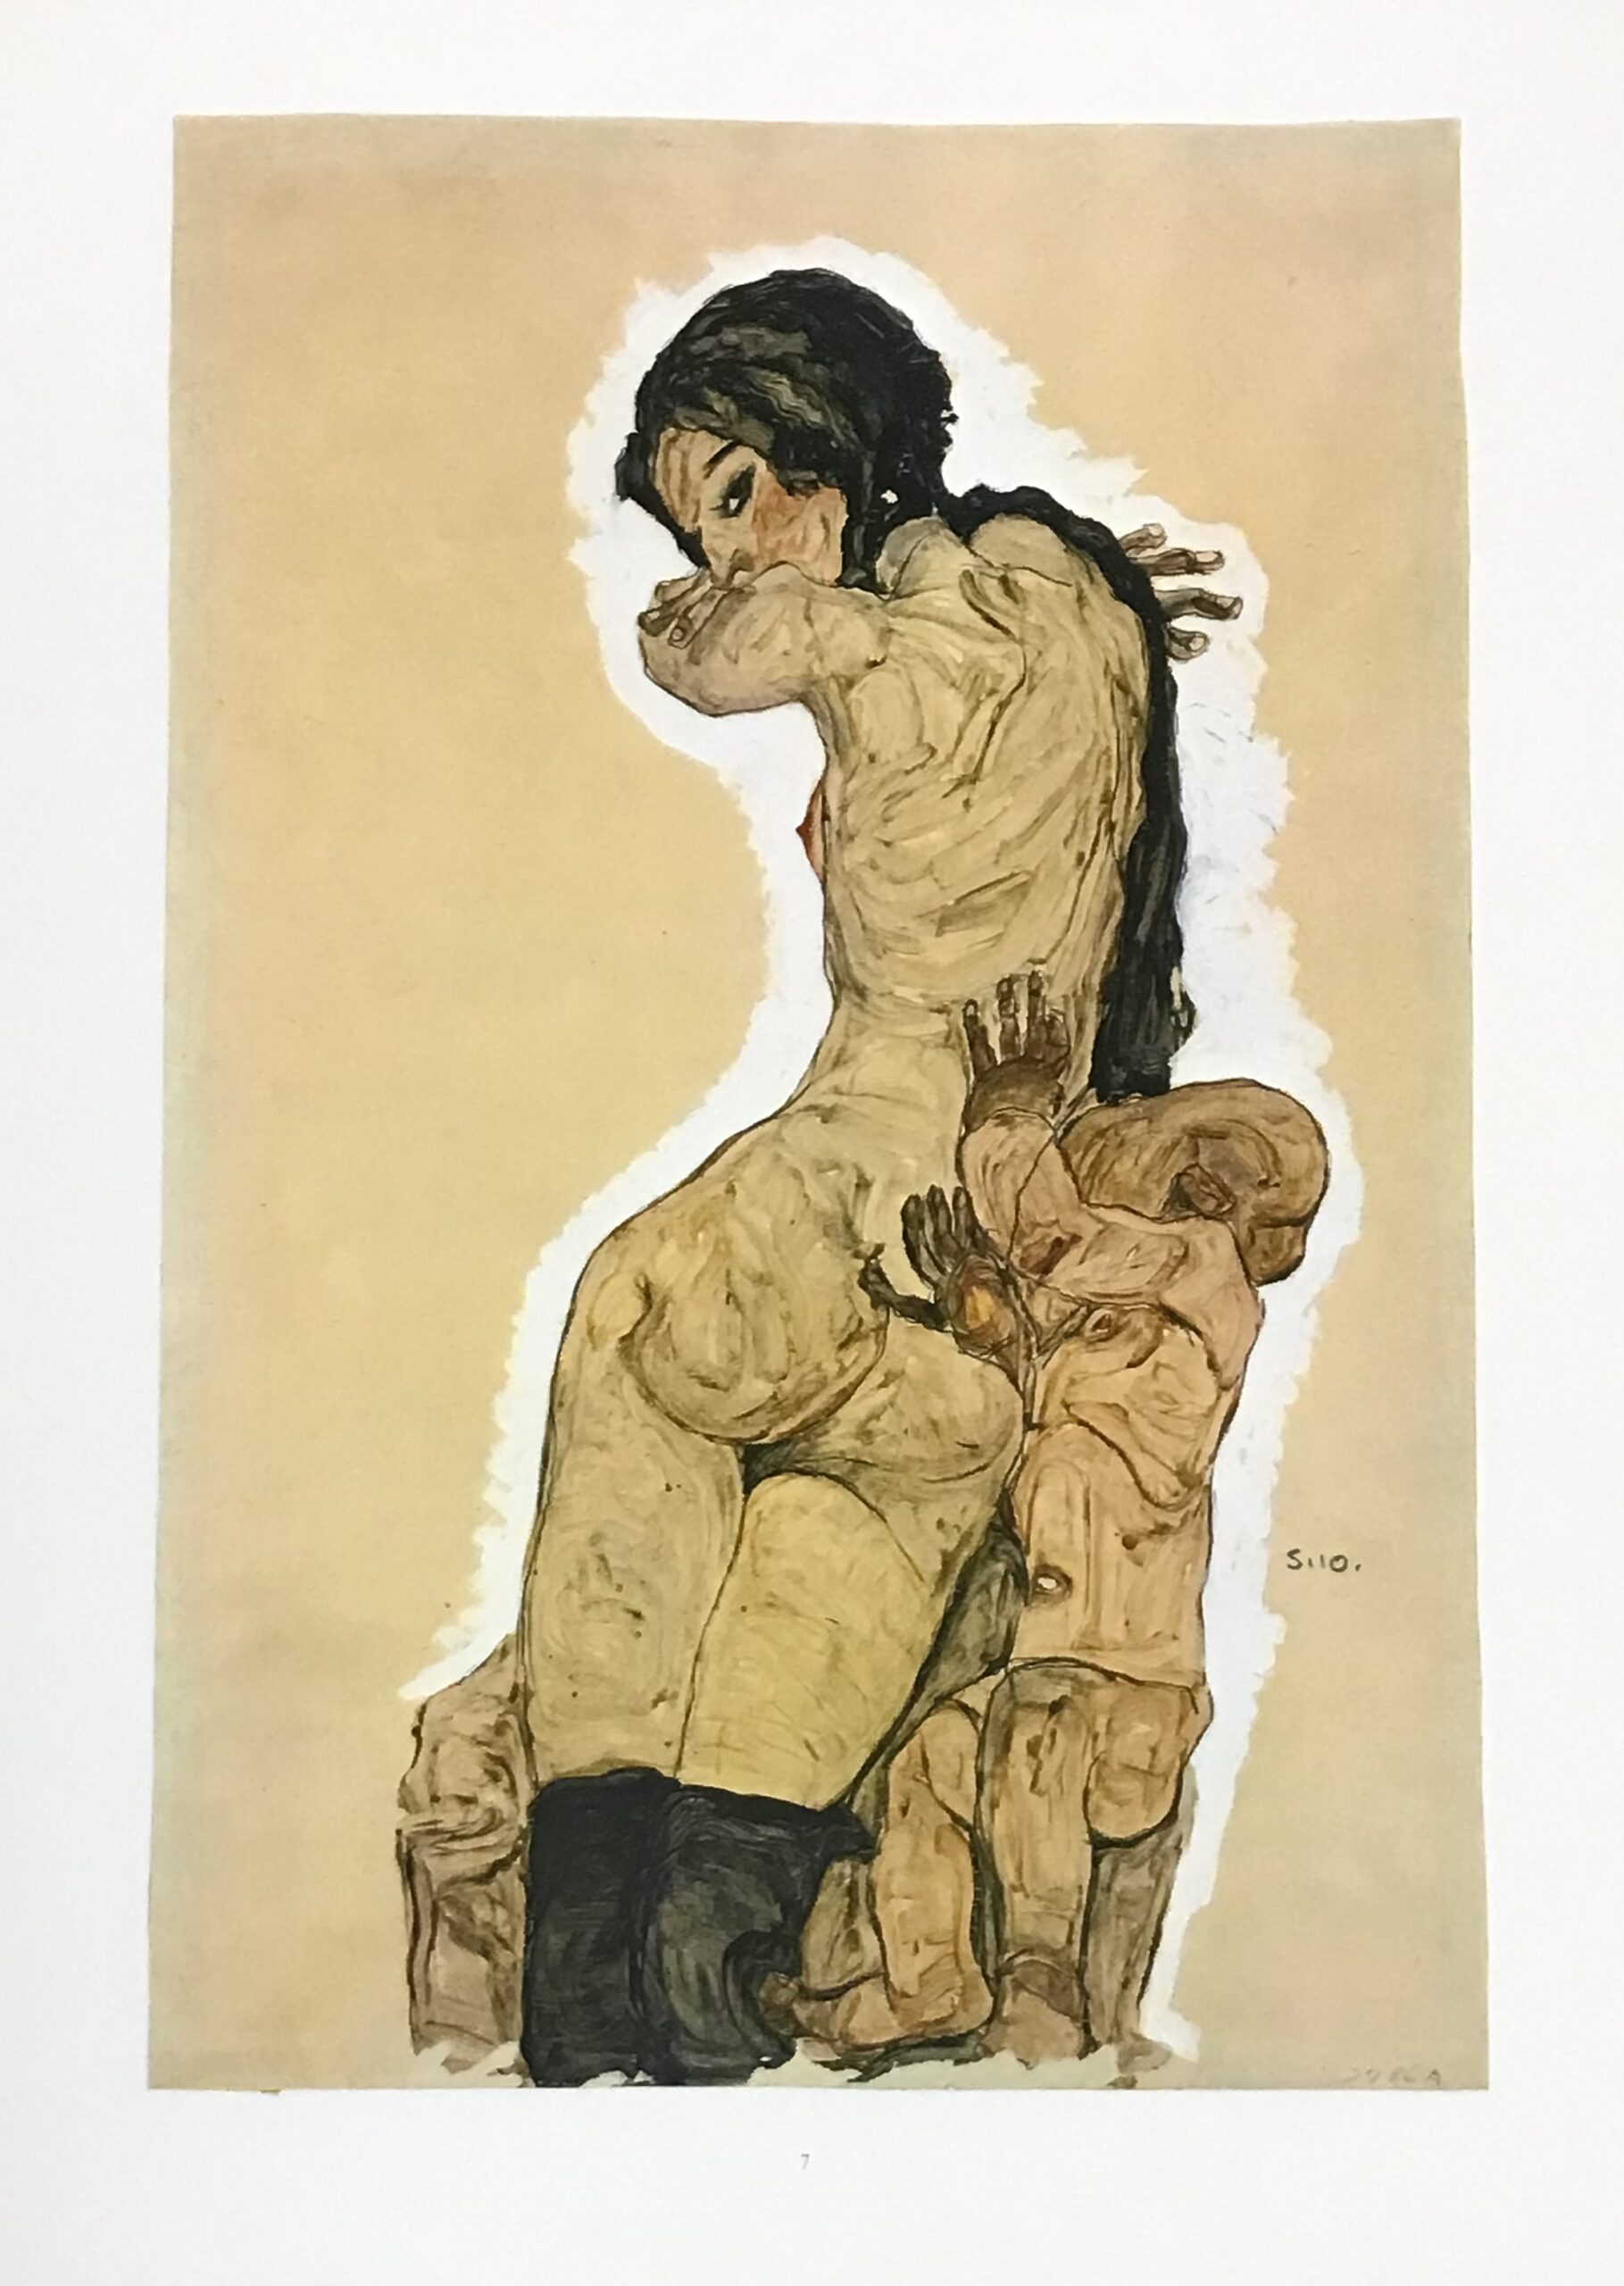 1981 Egon Schiele 7 Erotic Drawings Mother and child